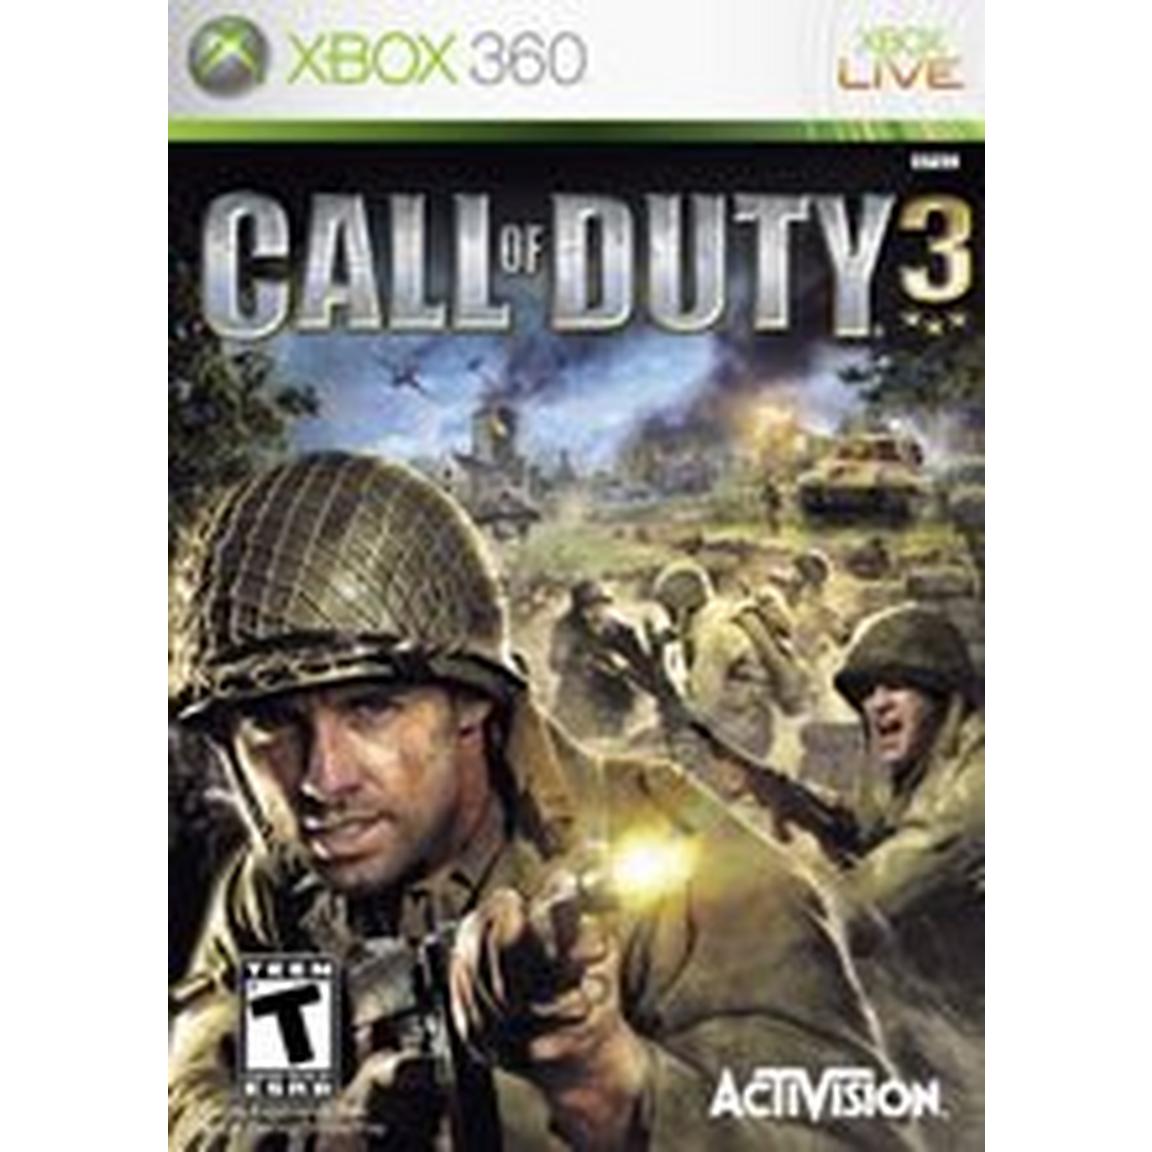 Call of Duty 3 - Xbox 360, Pre-Owned -  Activision